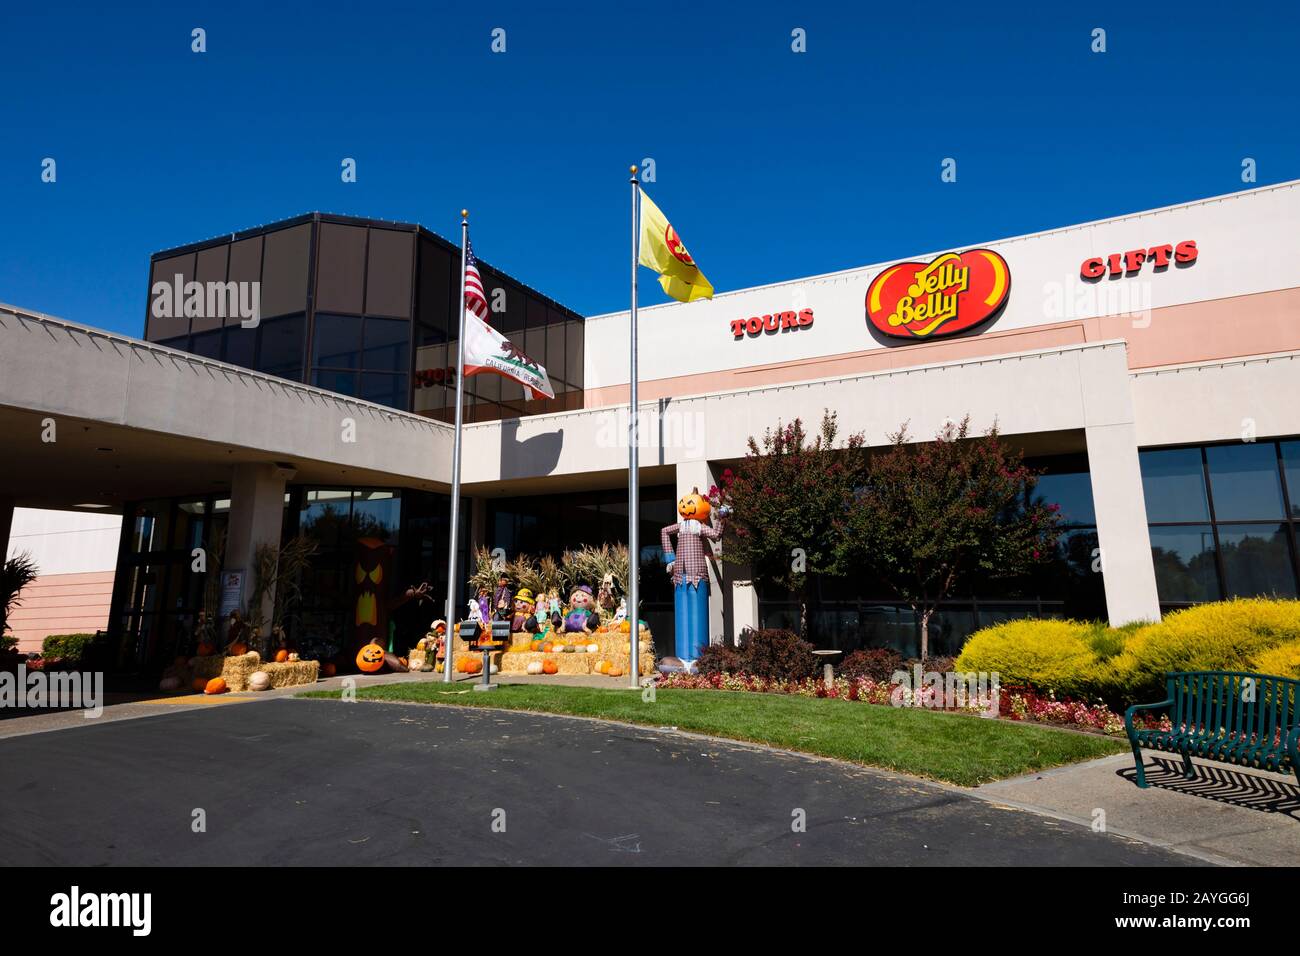 Halloween display at the Jelly Belly Factory, 1 Jelly Belly lane Fairfield, California, United States of America Stock Photo